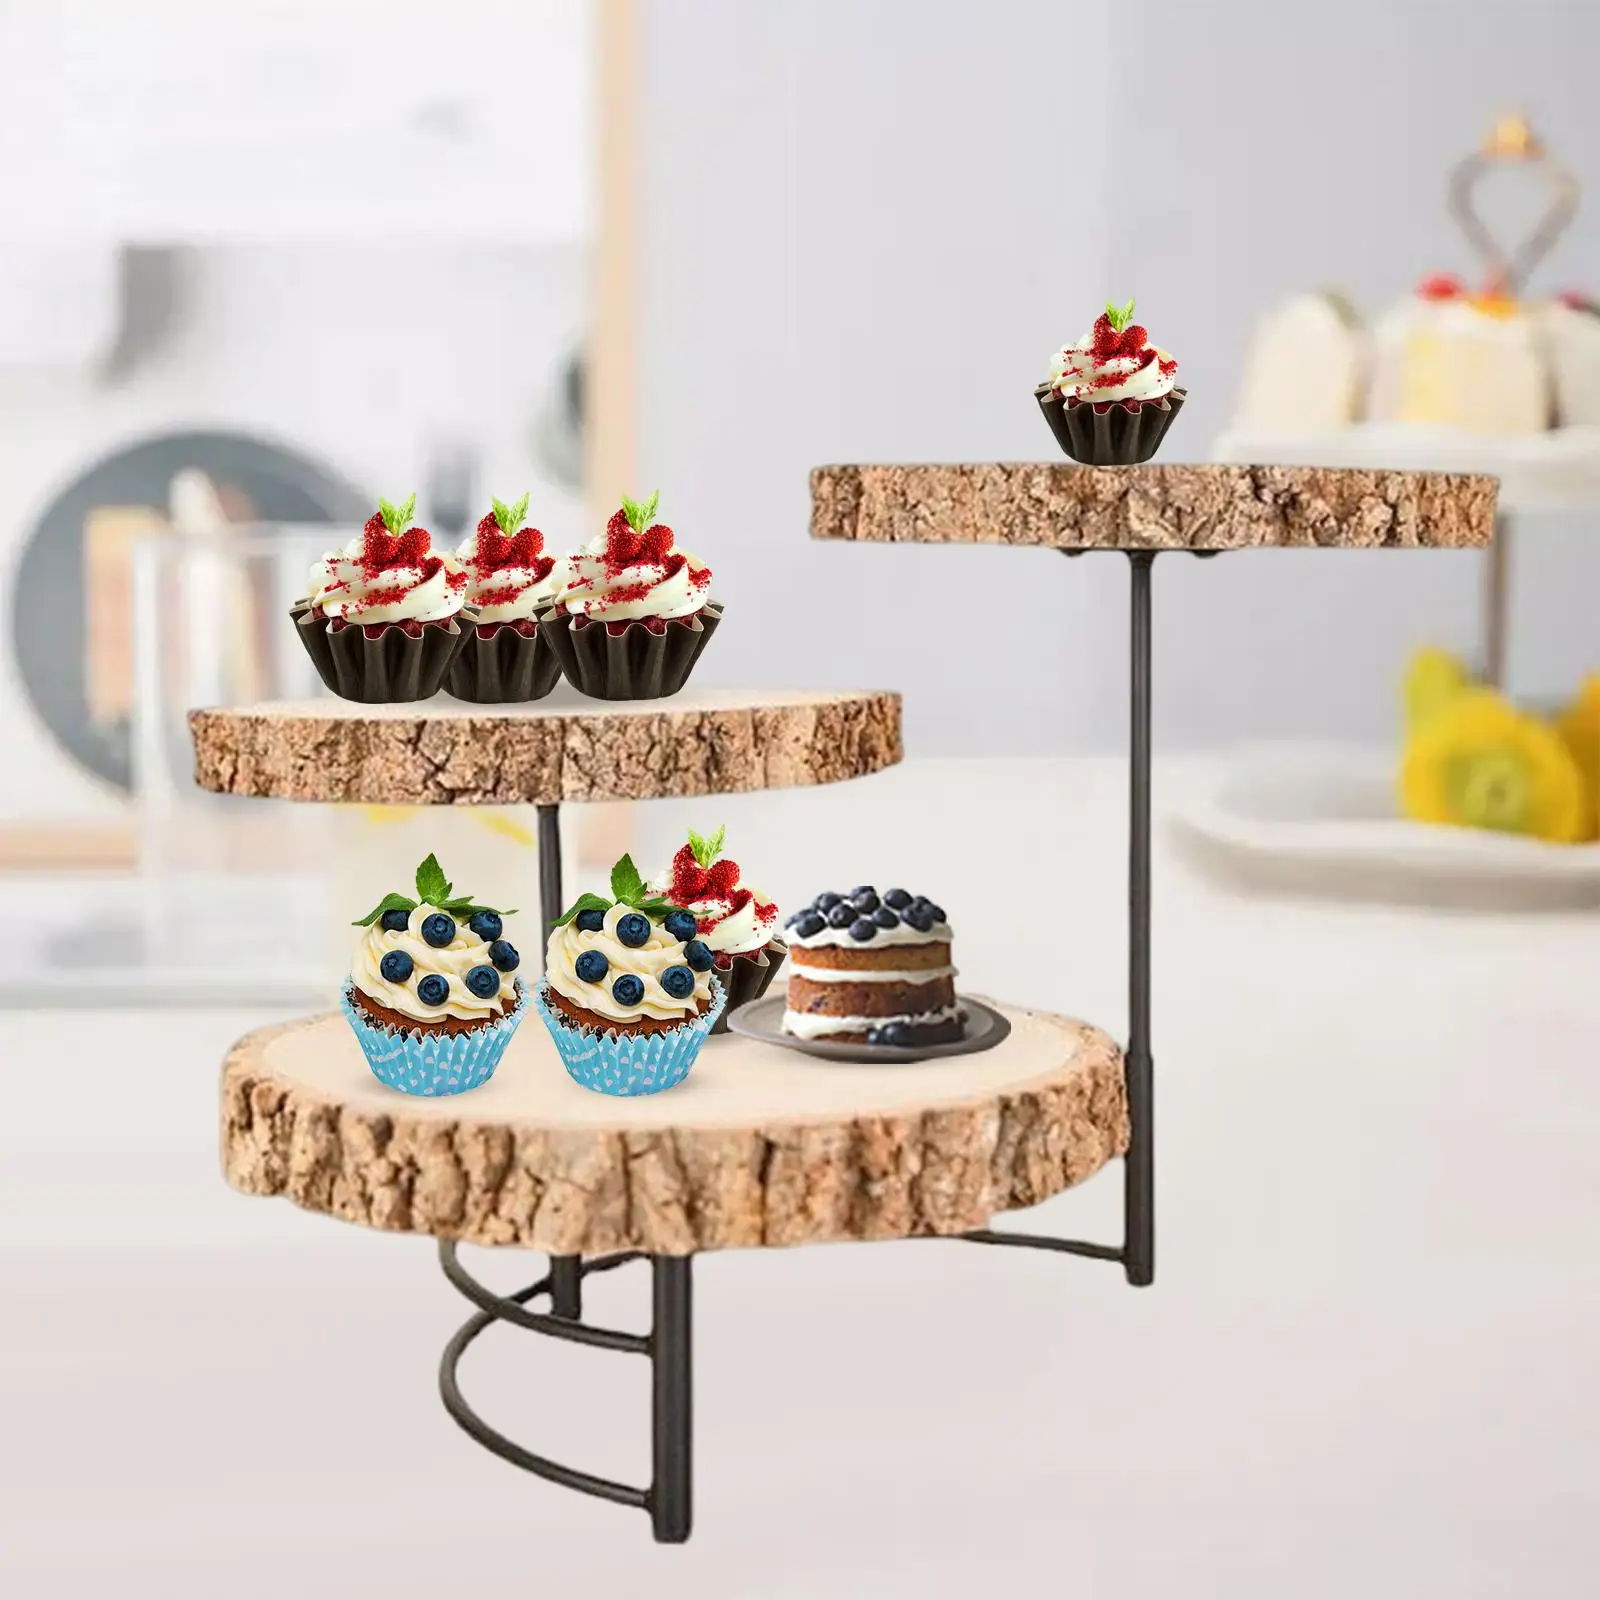 Removable Wooden Cake Stands 3 Layers Dessert Tray Display Plate Cake Pedestal Stand Party Wedding Entertaining Bedroom Hotel